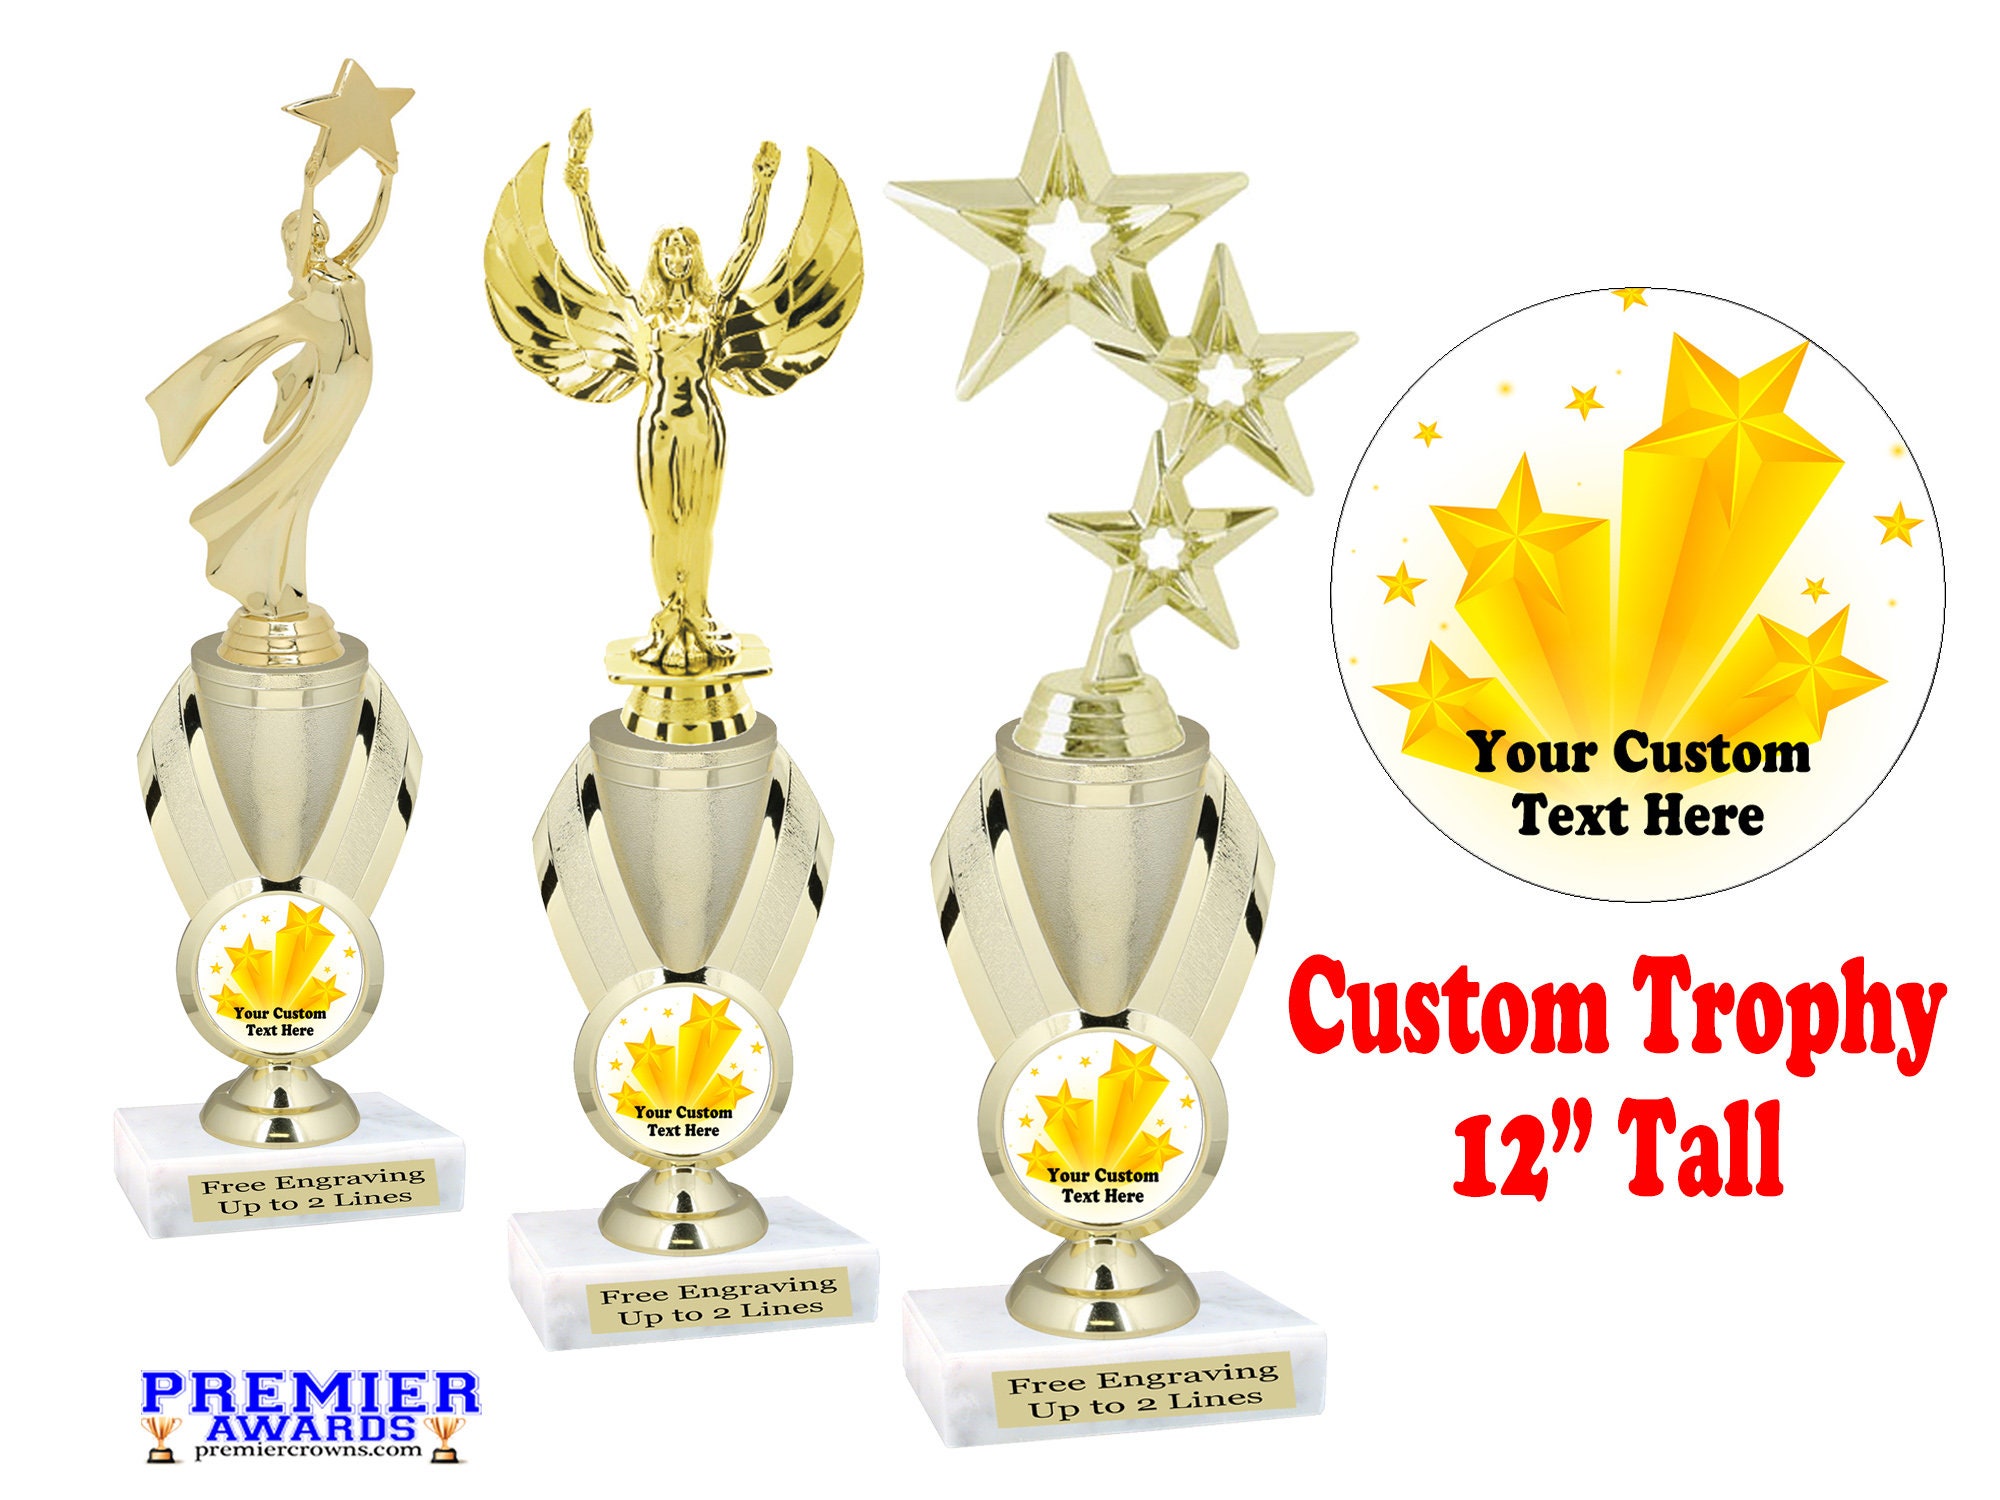 Custom Trophy. 12 tall Great trophy for any event | Etsy